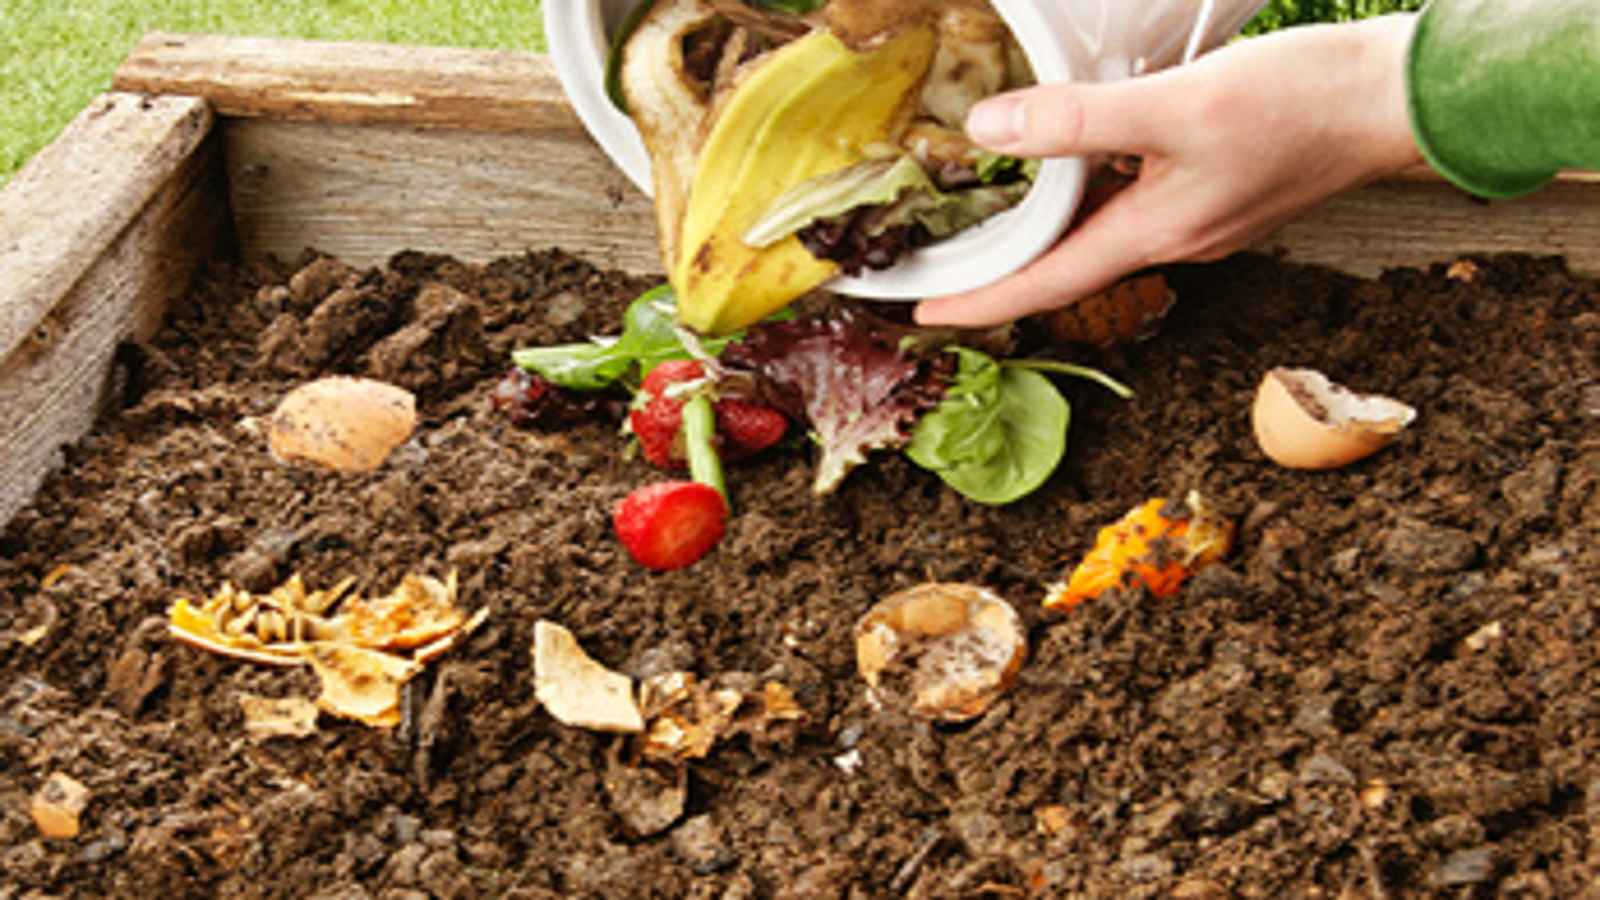 Learn About Composting Day 2023: Date, History, How to Recognise and Learn about Decomposition Day